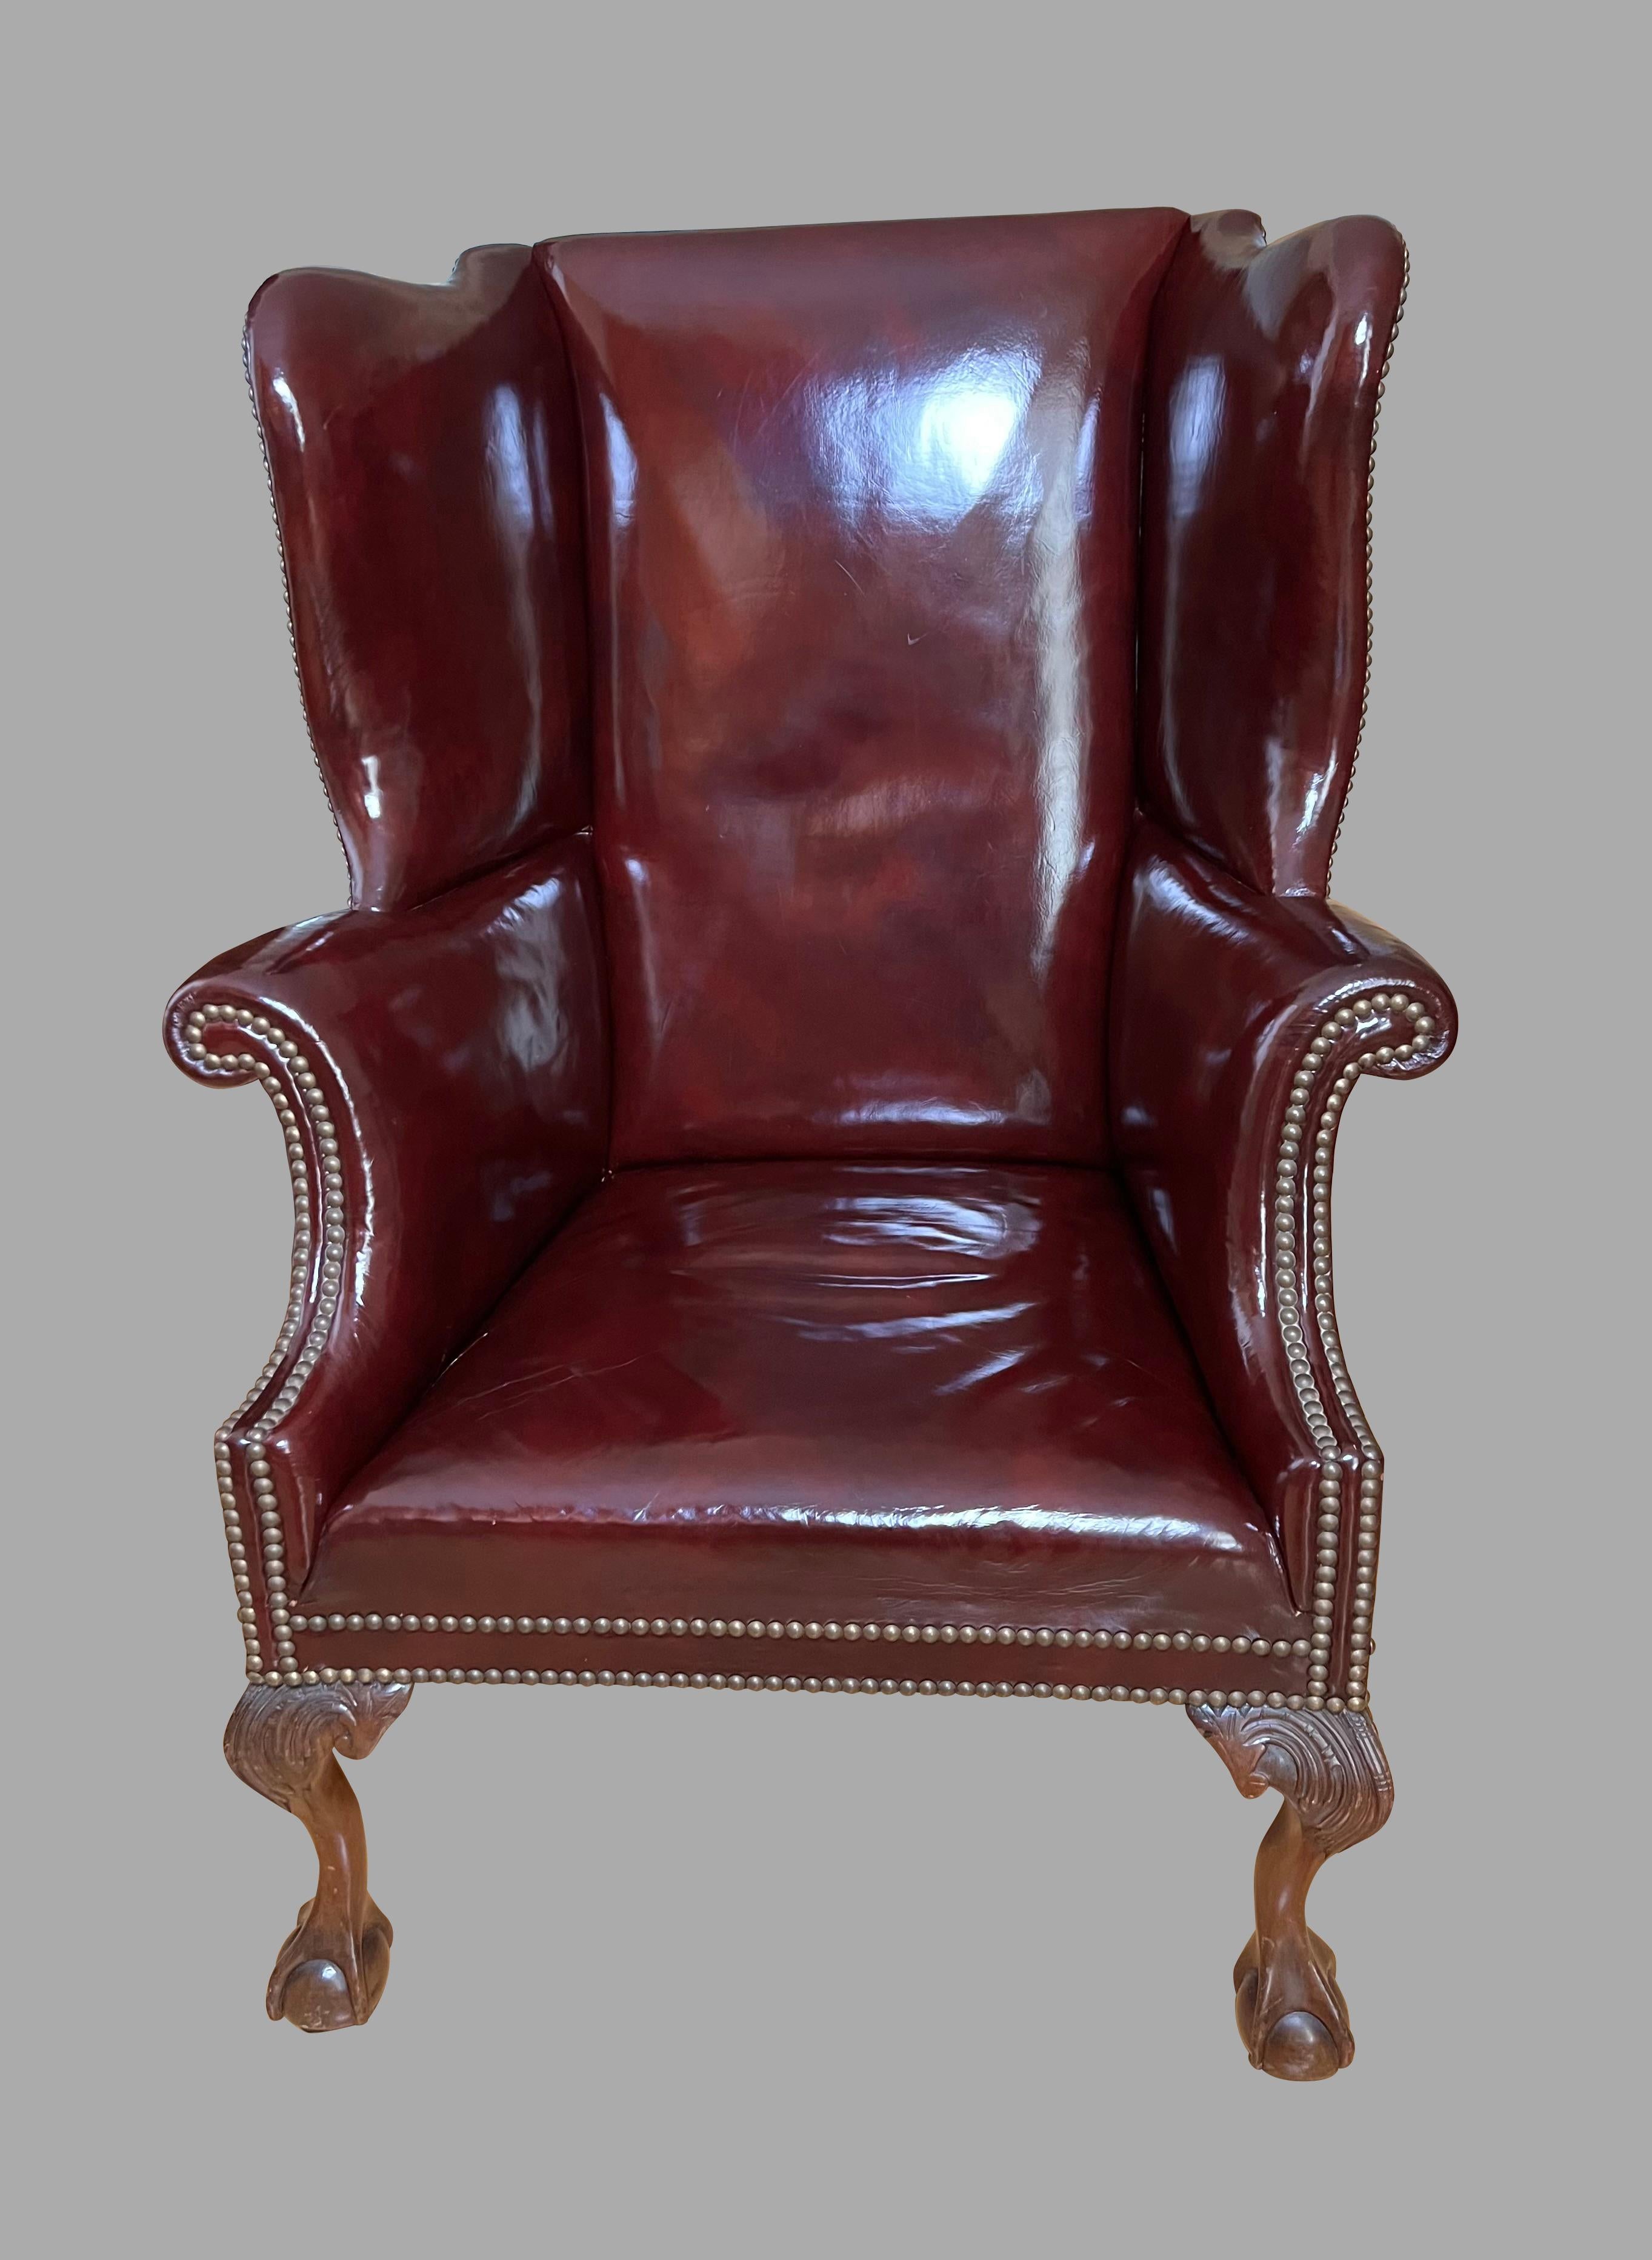 English Large Georgian Style Red Leather Wingback Armchair with Nailhead Trim